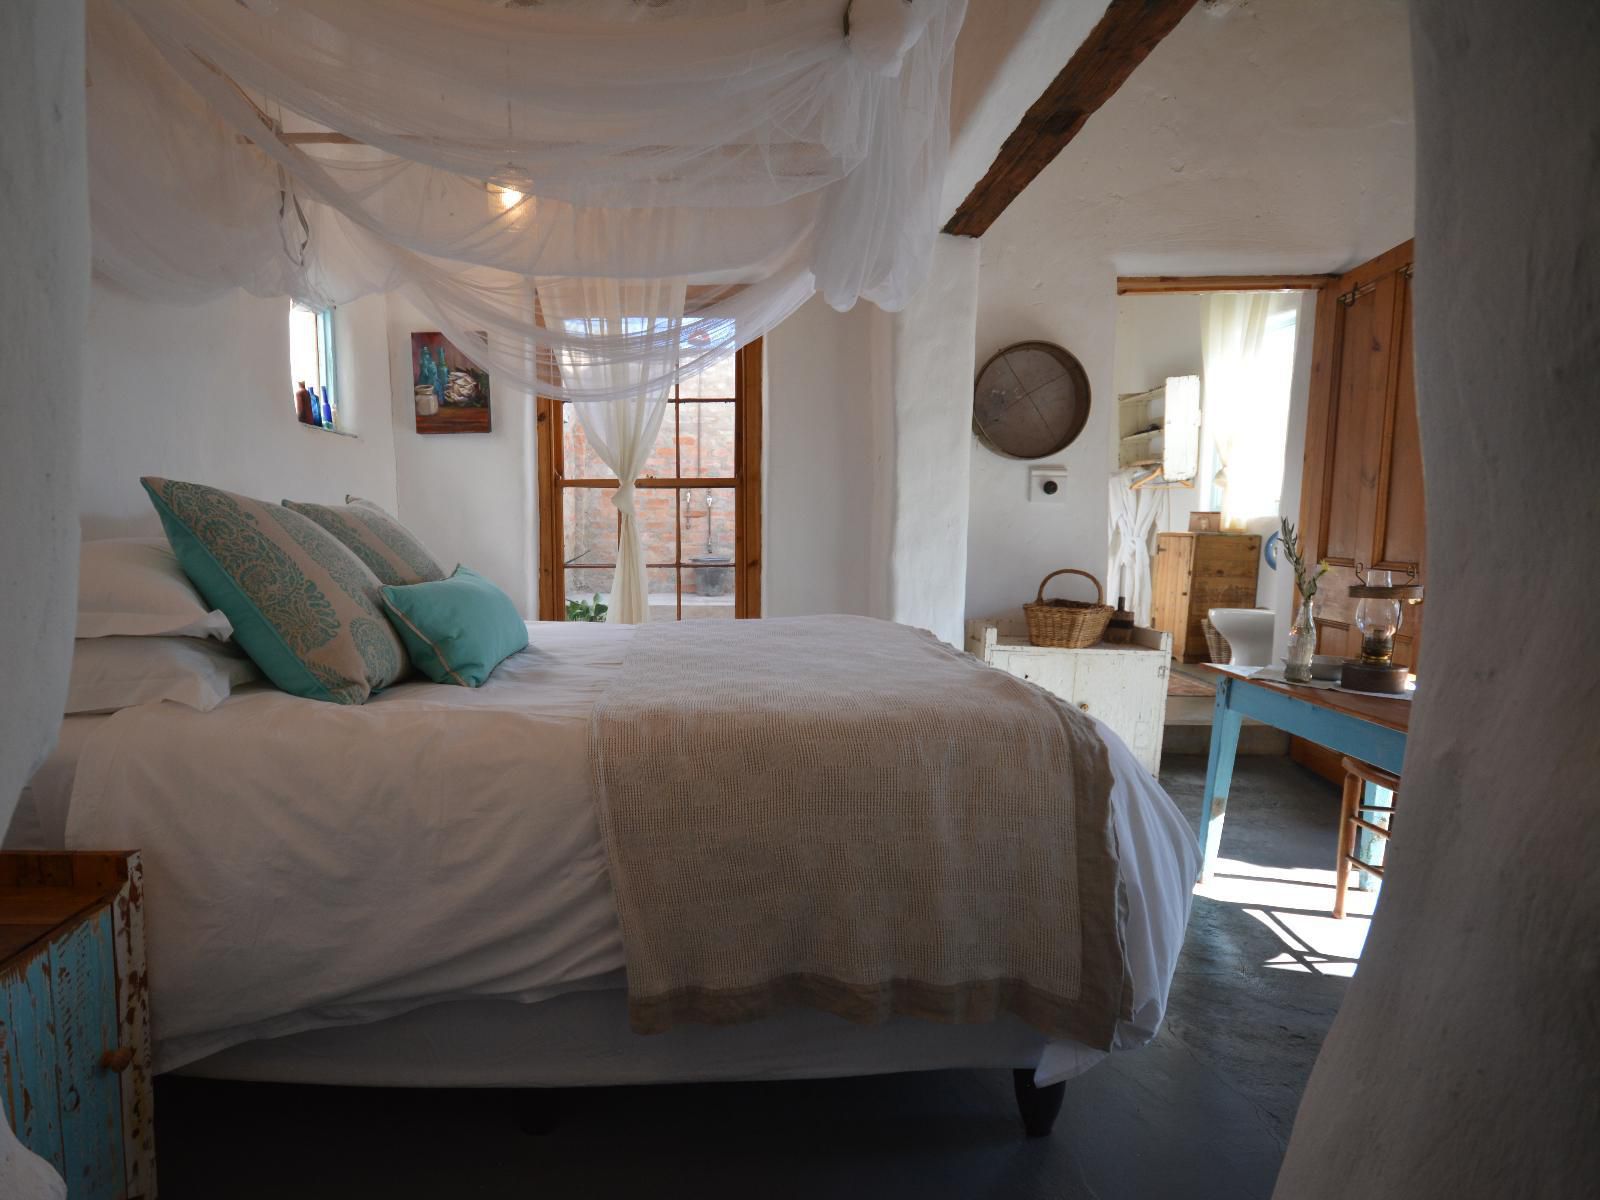 Ta Mala S Cottage Prince Albert Western Cape South Africa Unsaturated, Bedroom